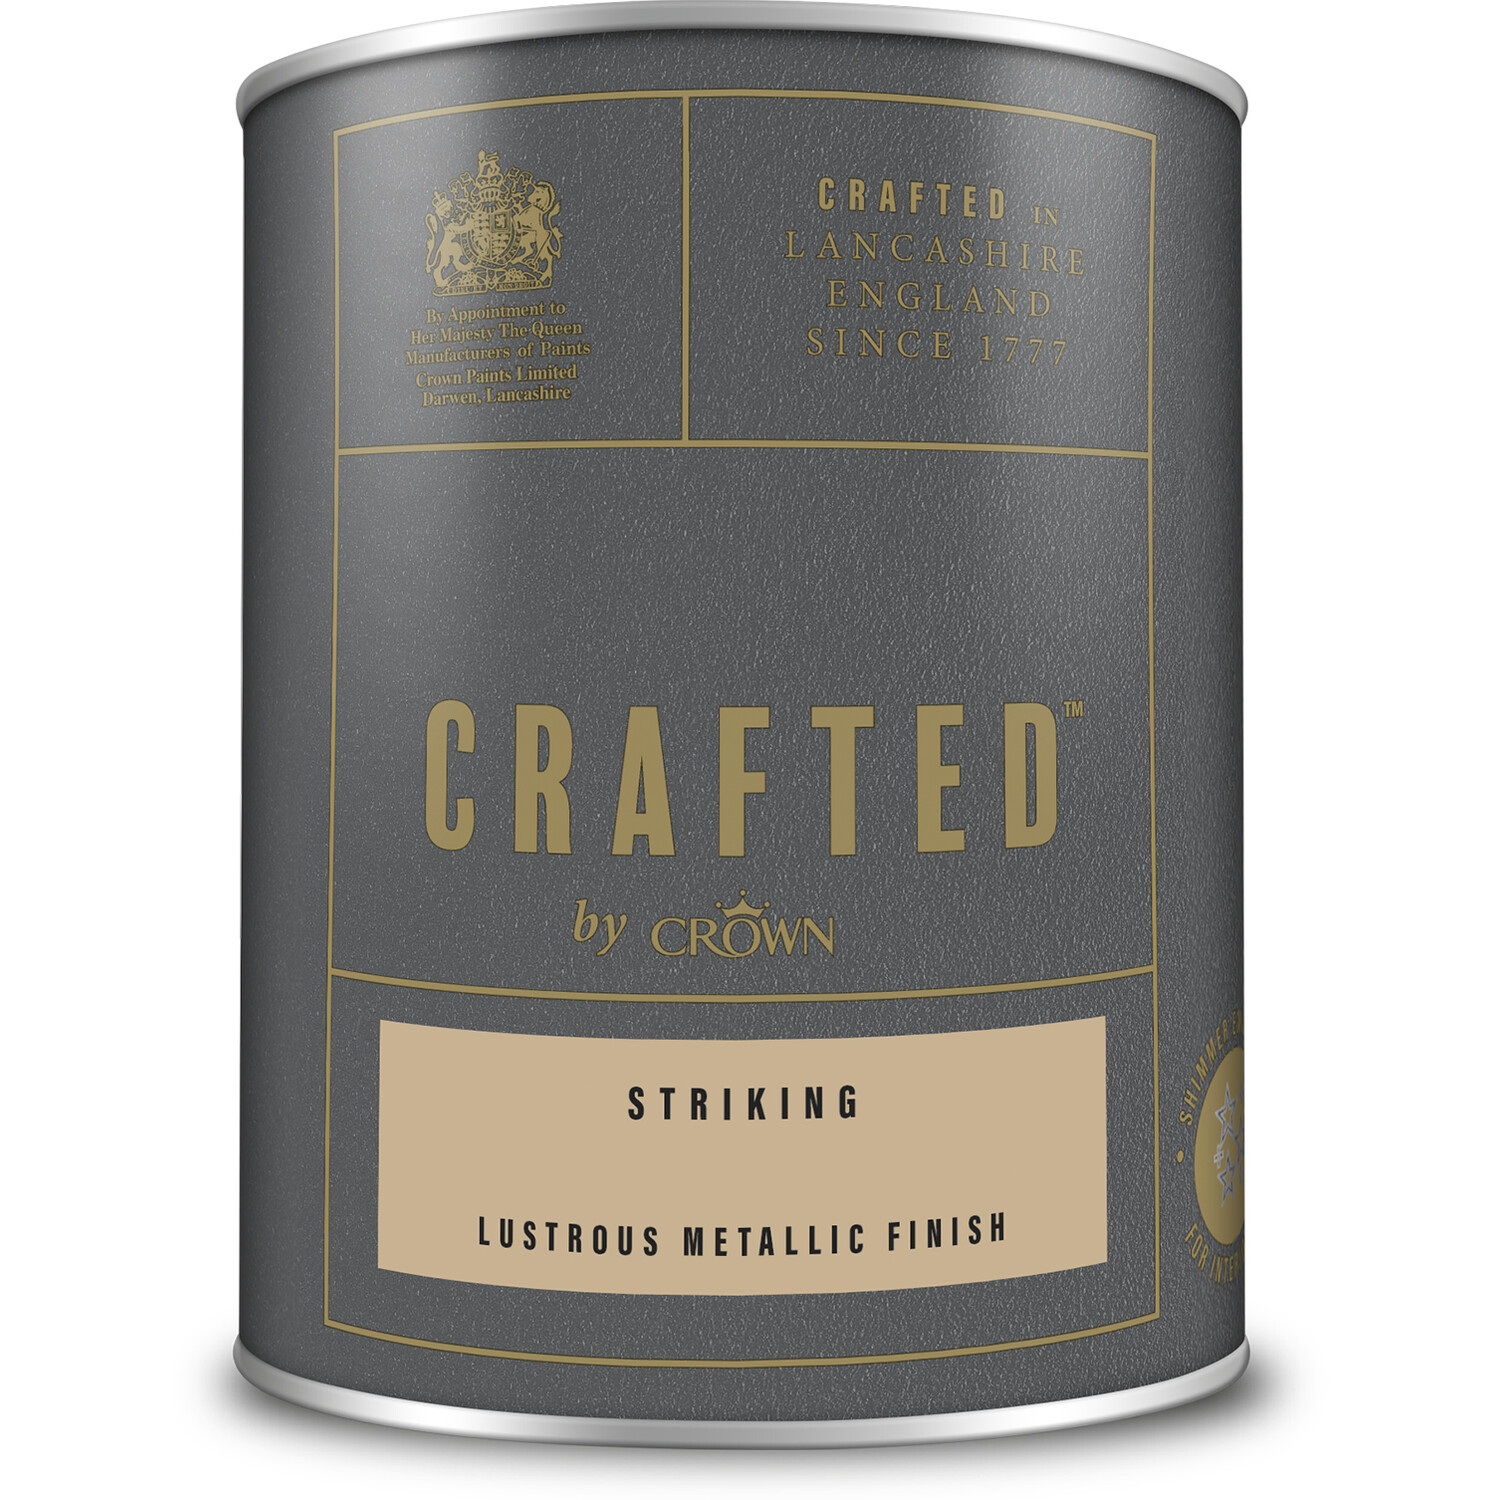 Crown Crafted Walls Wood and Metal Striking Lustrous Metallic Shimmer Emulsion Paint 1.25L Image 2